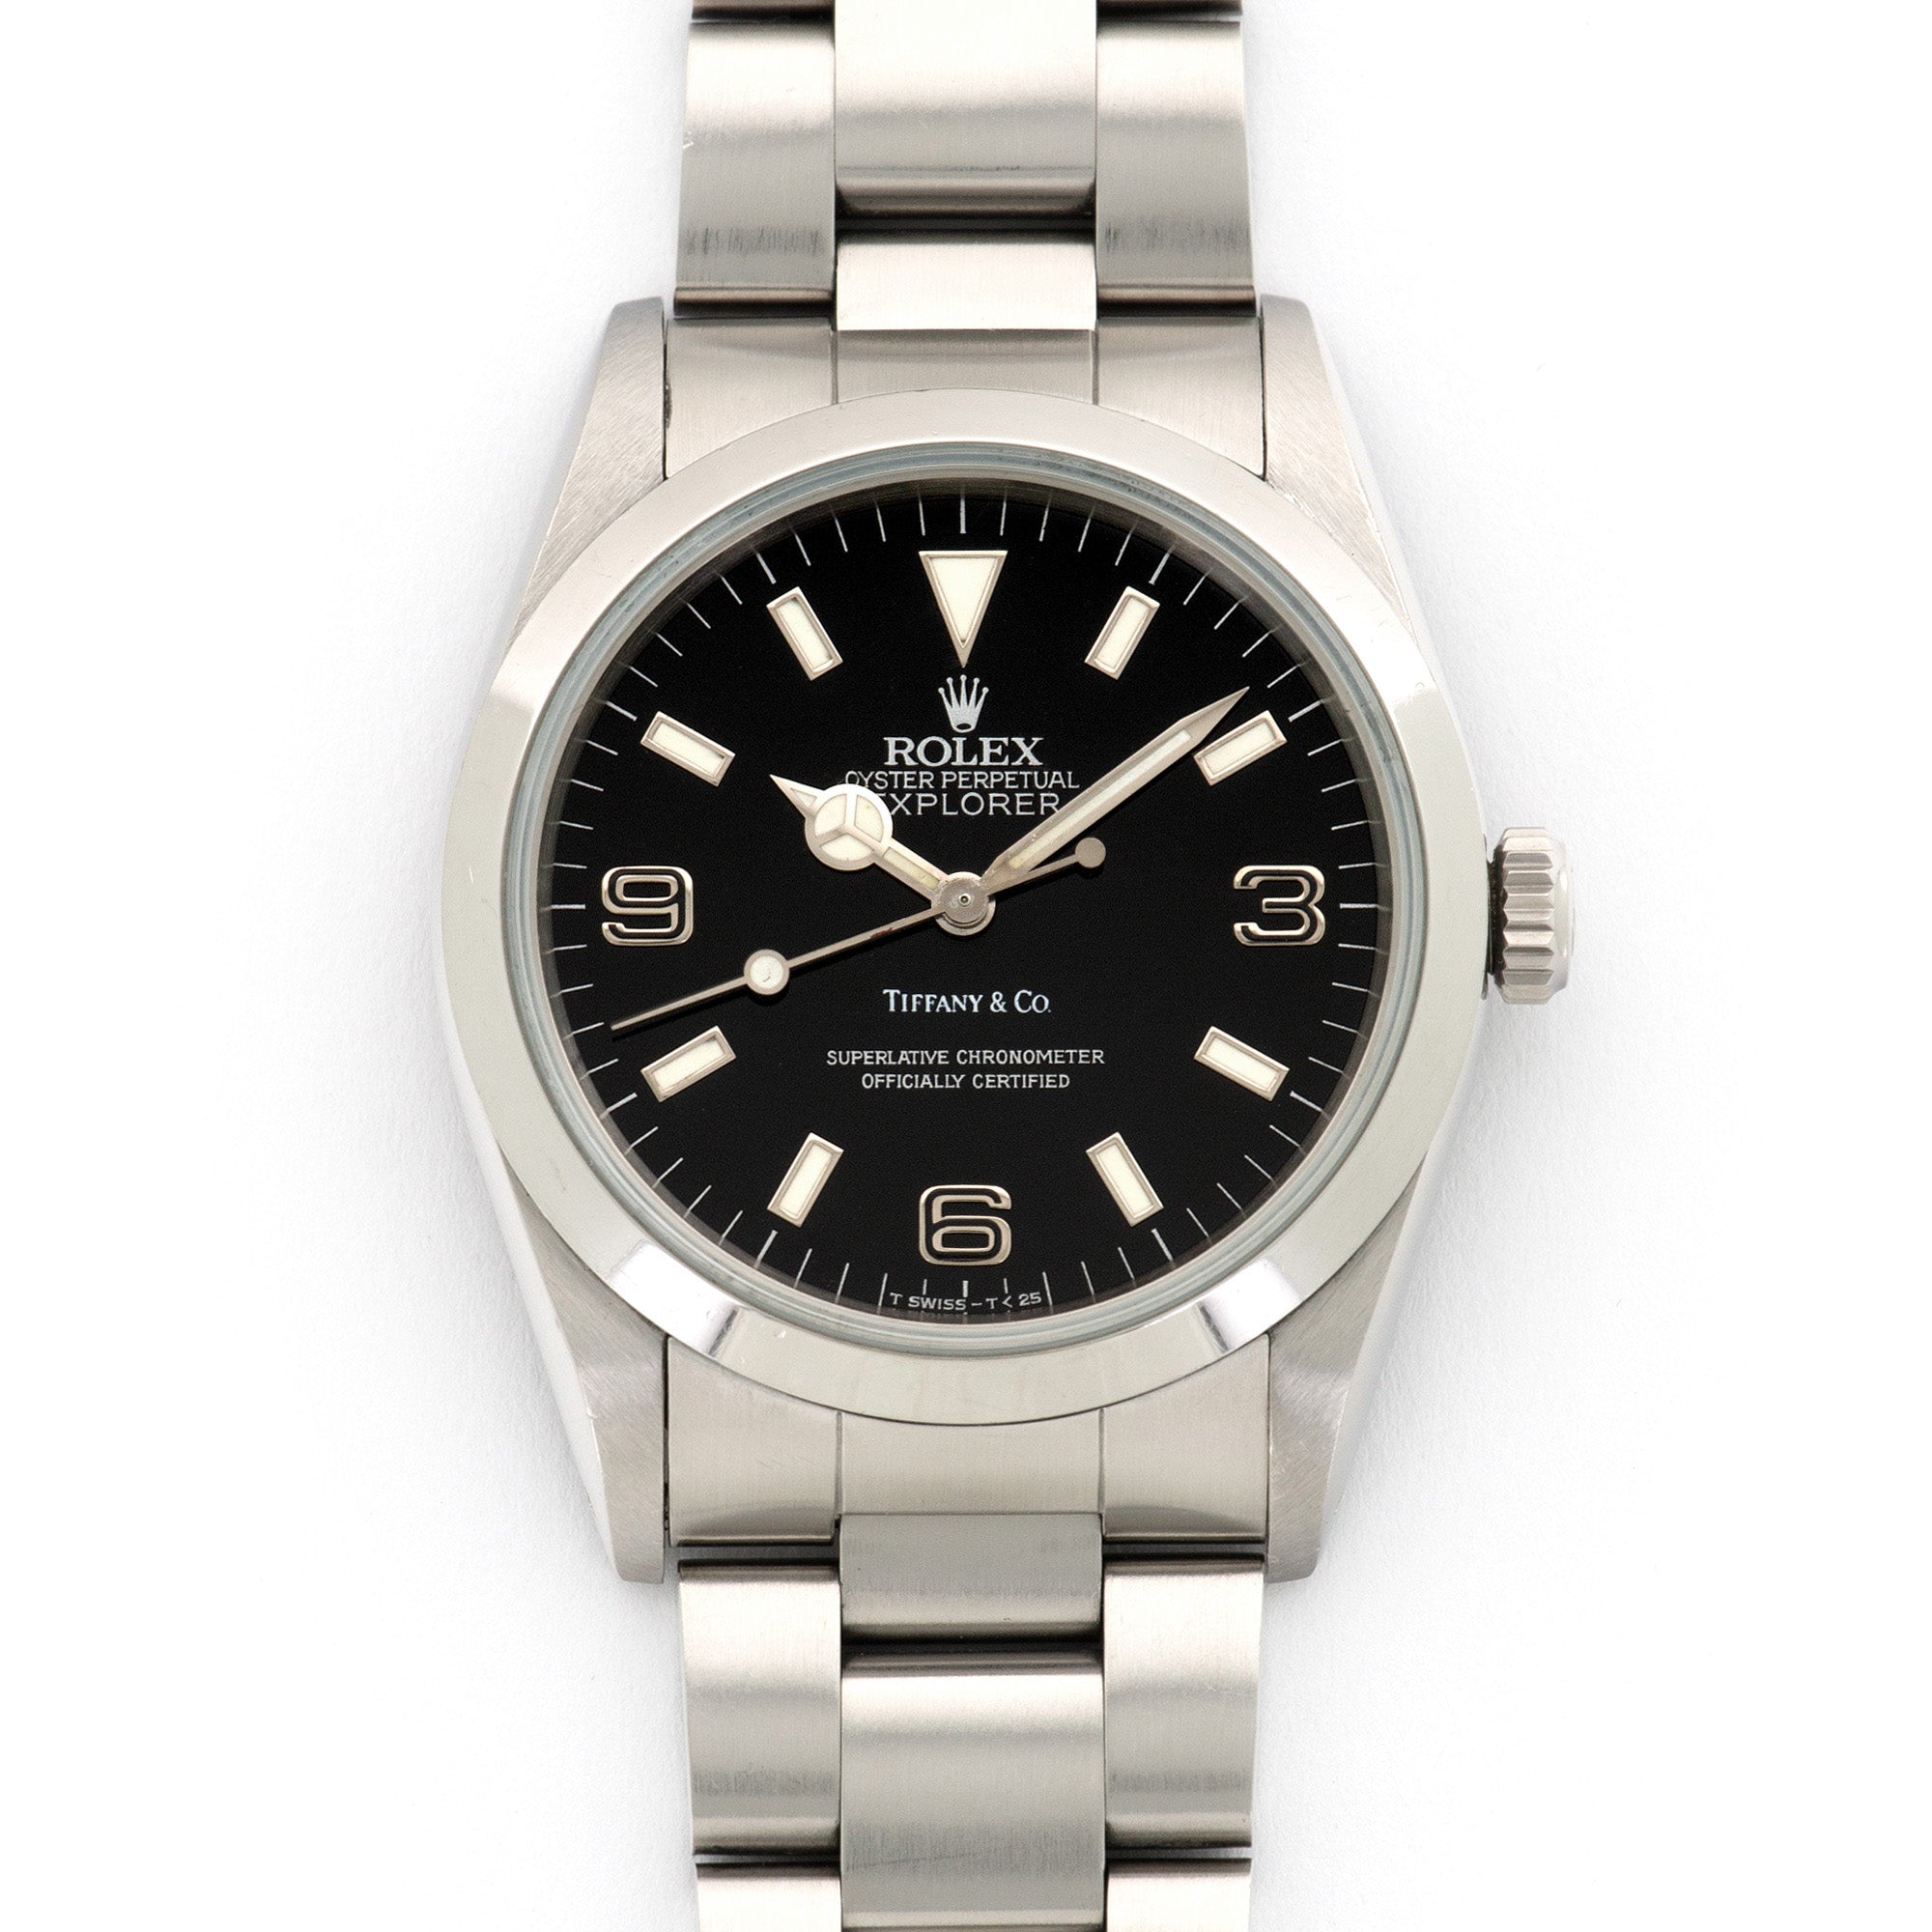 Rolex - Rolex Explorer Black Out Watch, Ref. 14270 Retailed by Tiffany & Co. - The Keystone Watches